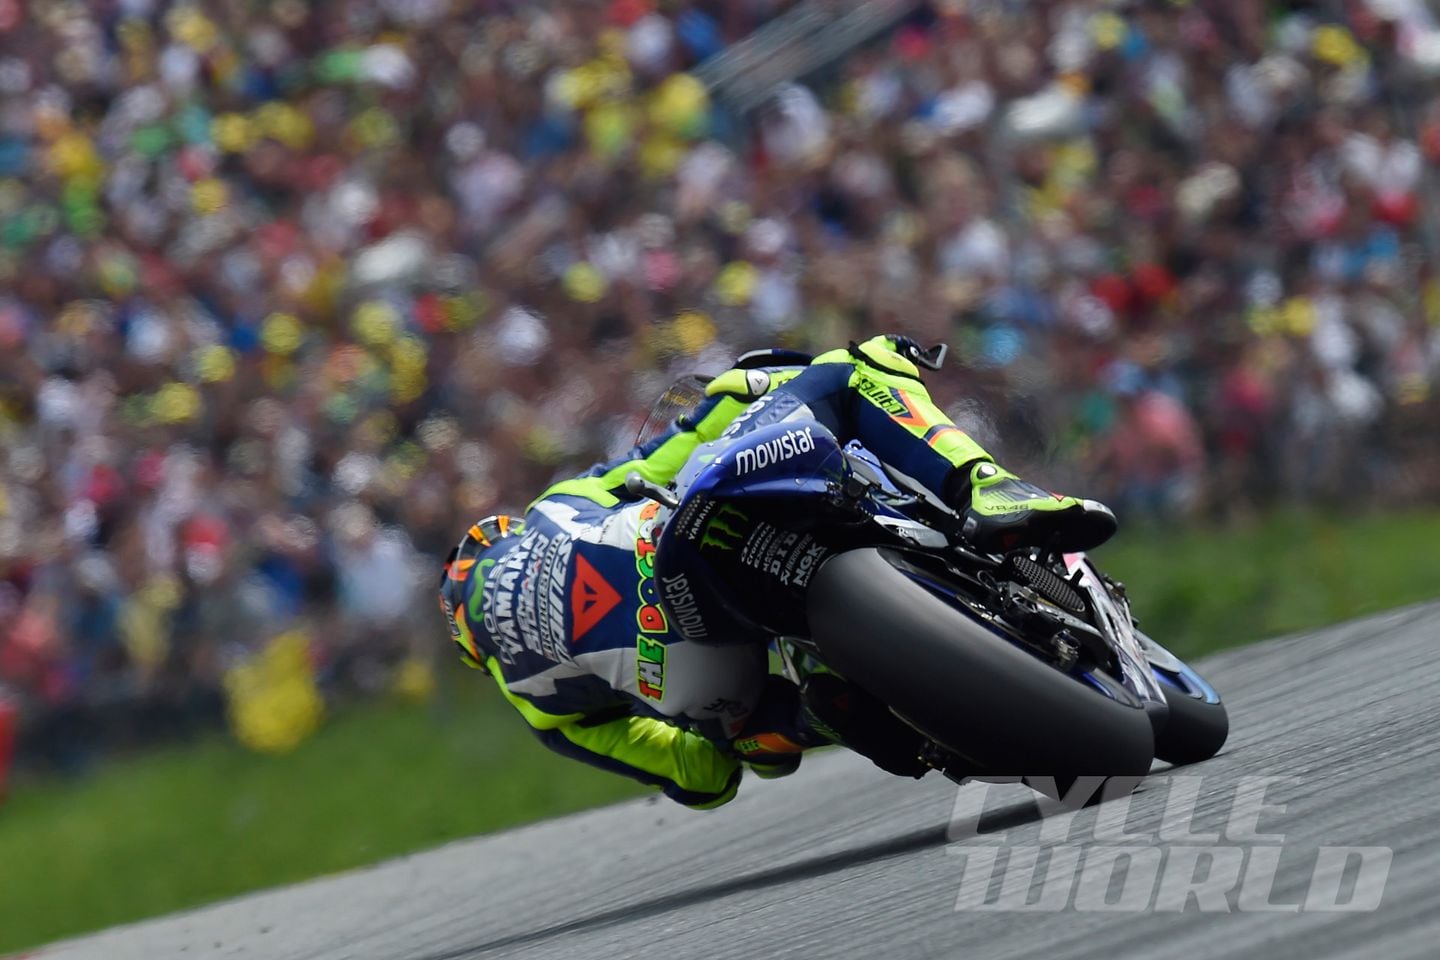 Valentino Rossi Remakes His Riding Style, MotoGP | Cycle World